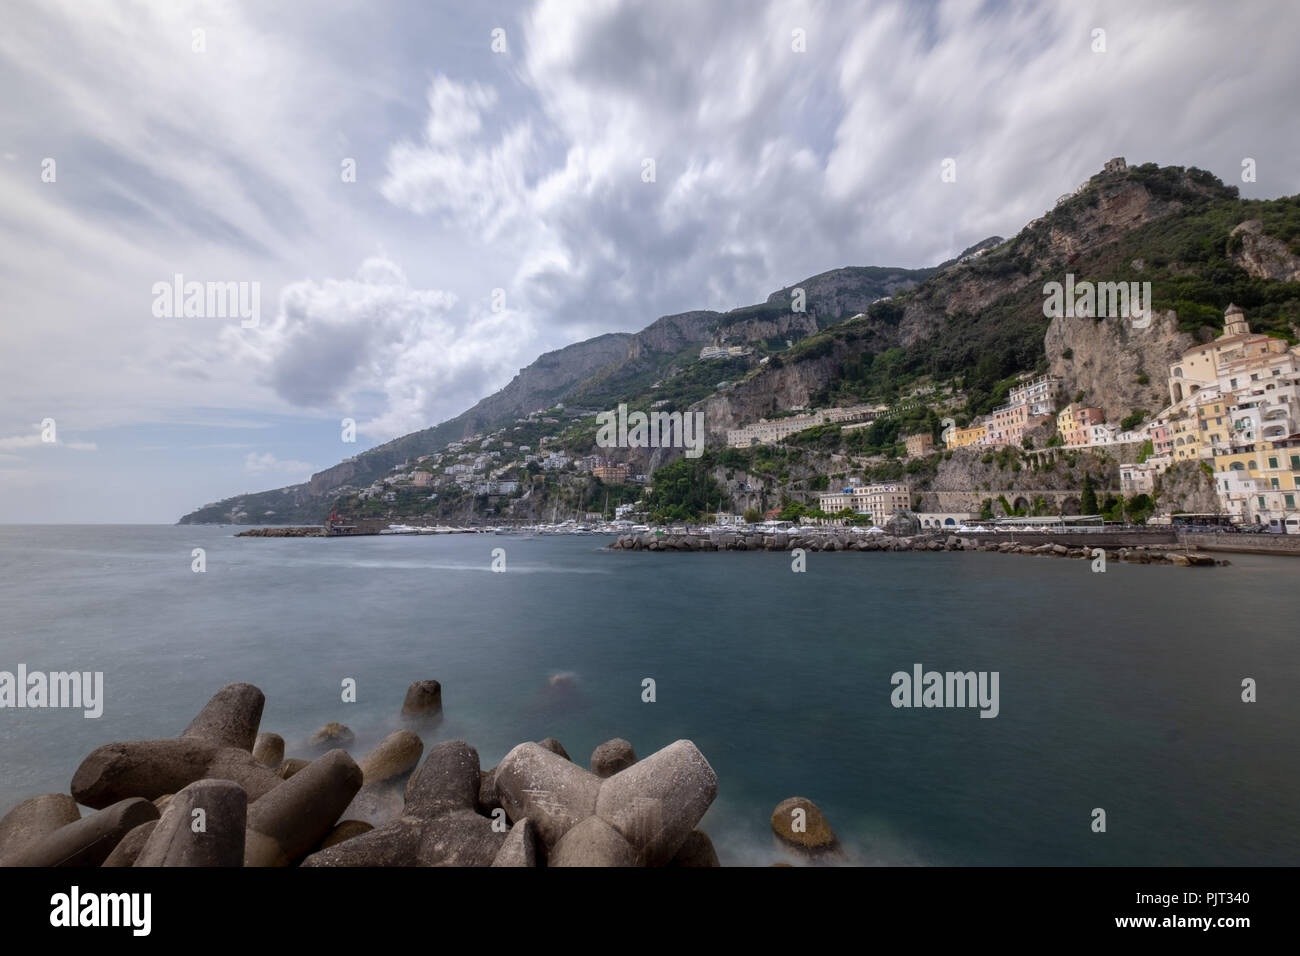 Afternoon summer view along the Amalfi Coast from Amalfi, Italy Stock Photo